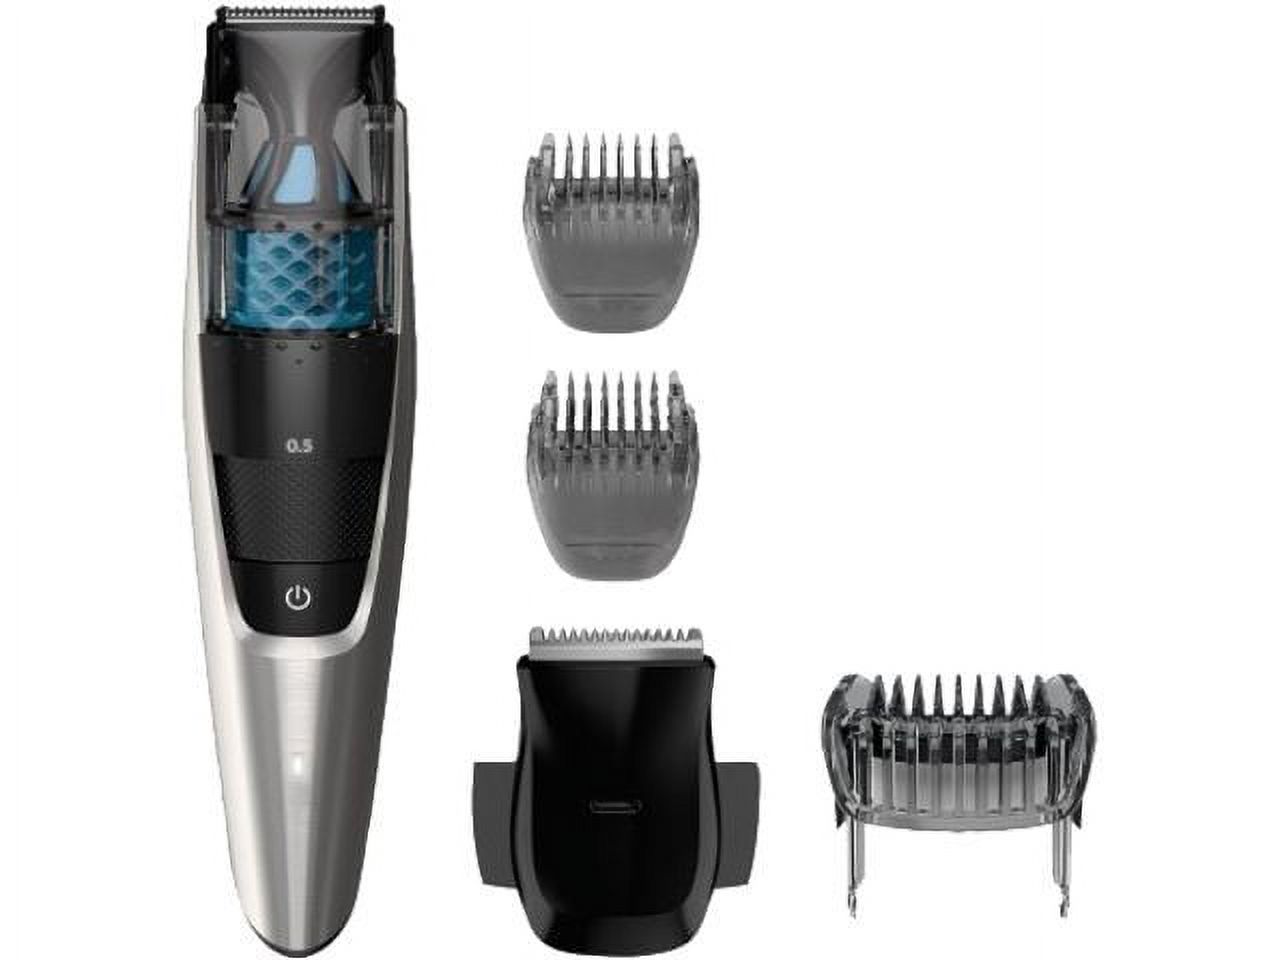 Philips Norelco Beard Trimmer Vacuum w 20 Length Settings, BT7215/49 - image 1 of 11